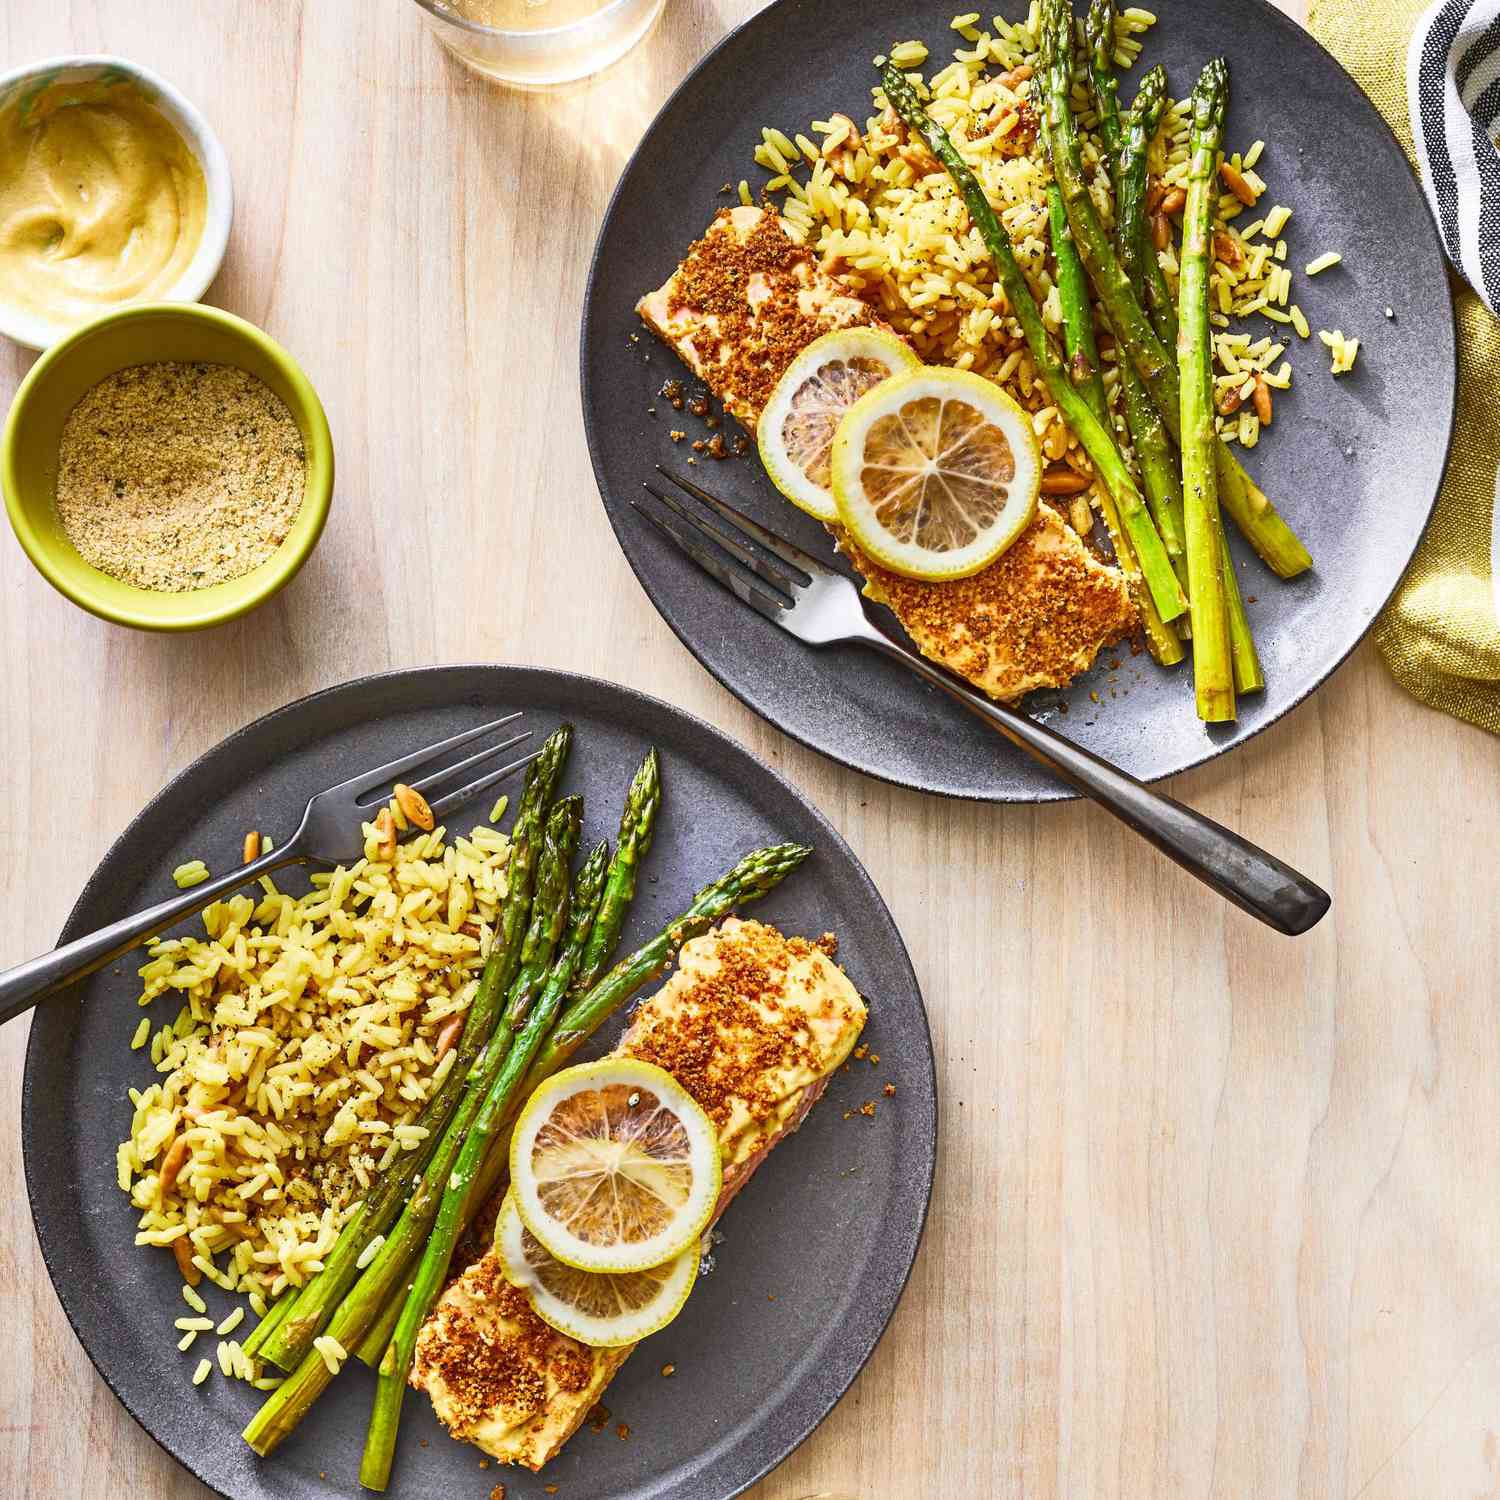 Breaded, baked salmon fillets topped with lemon slices, served alongside asparagus slices and rice pilaf on blue plates